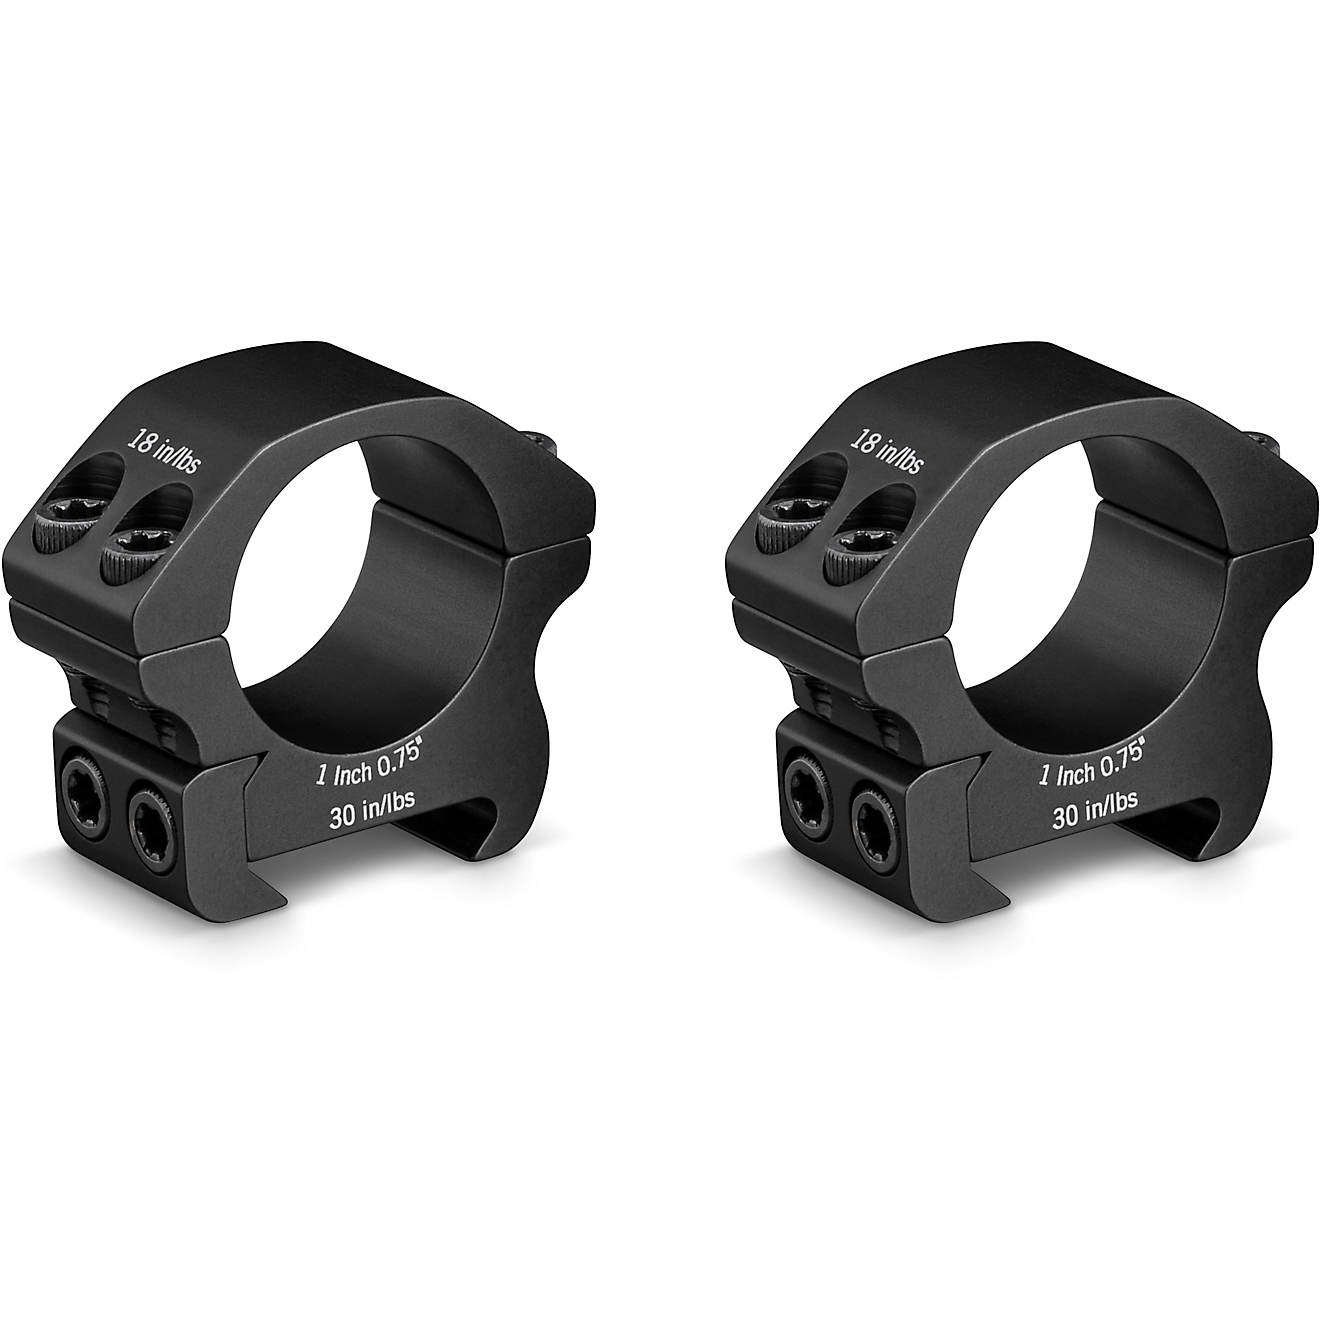 Vortex Pro Series 1 in Low Riflescope Rings                                                                                      - view number 1